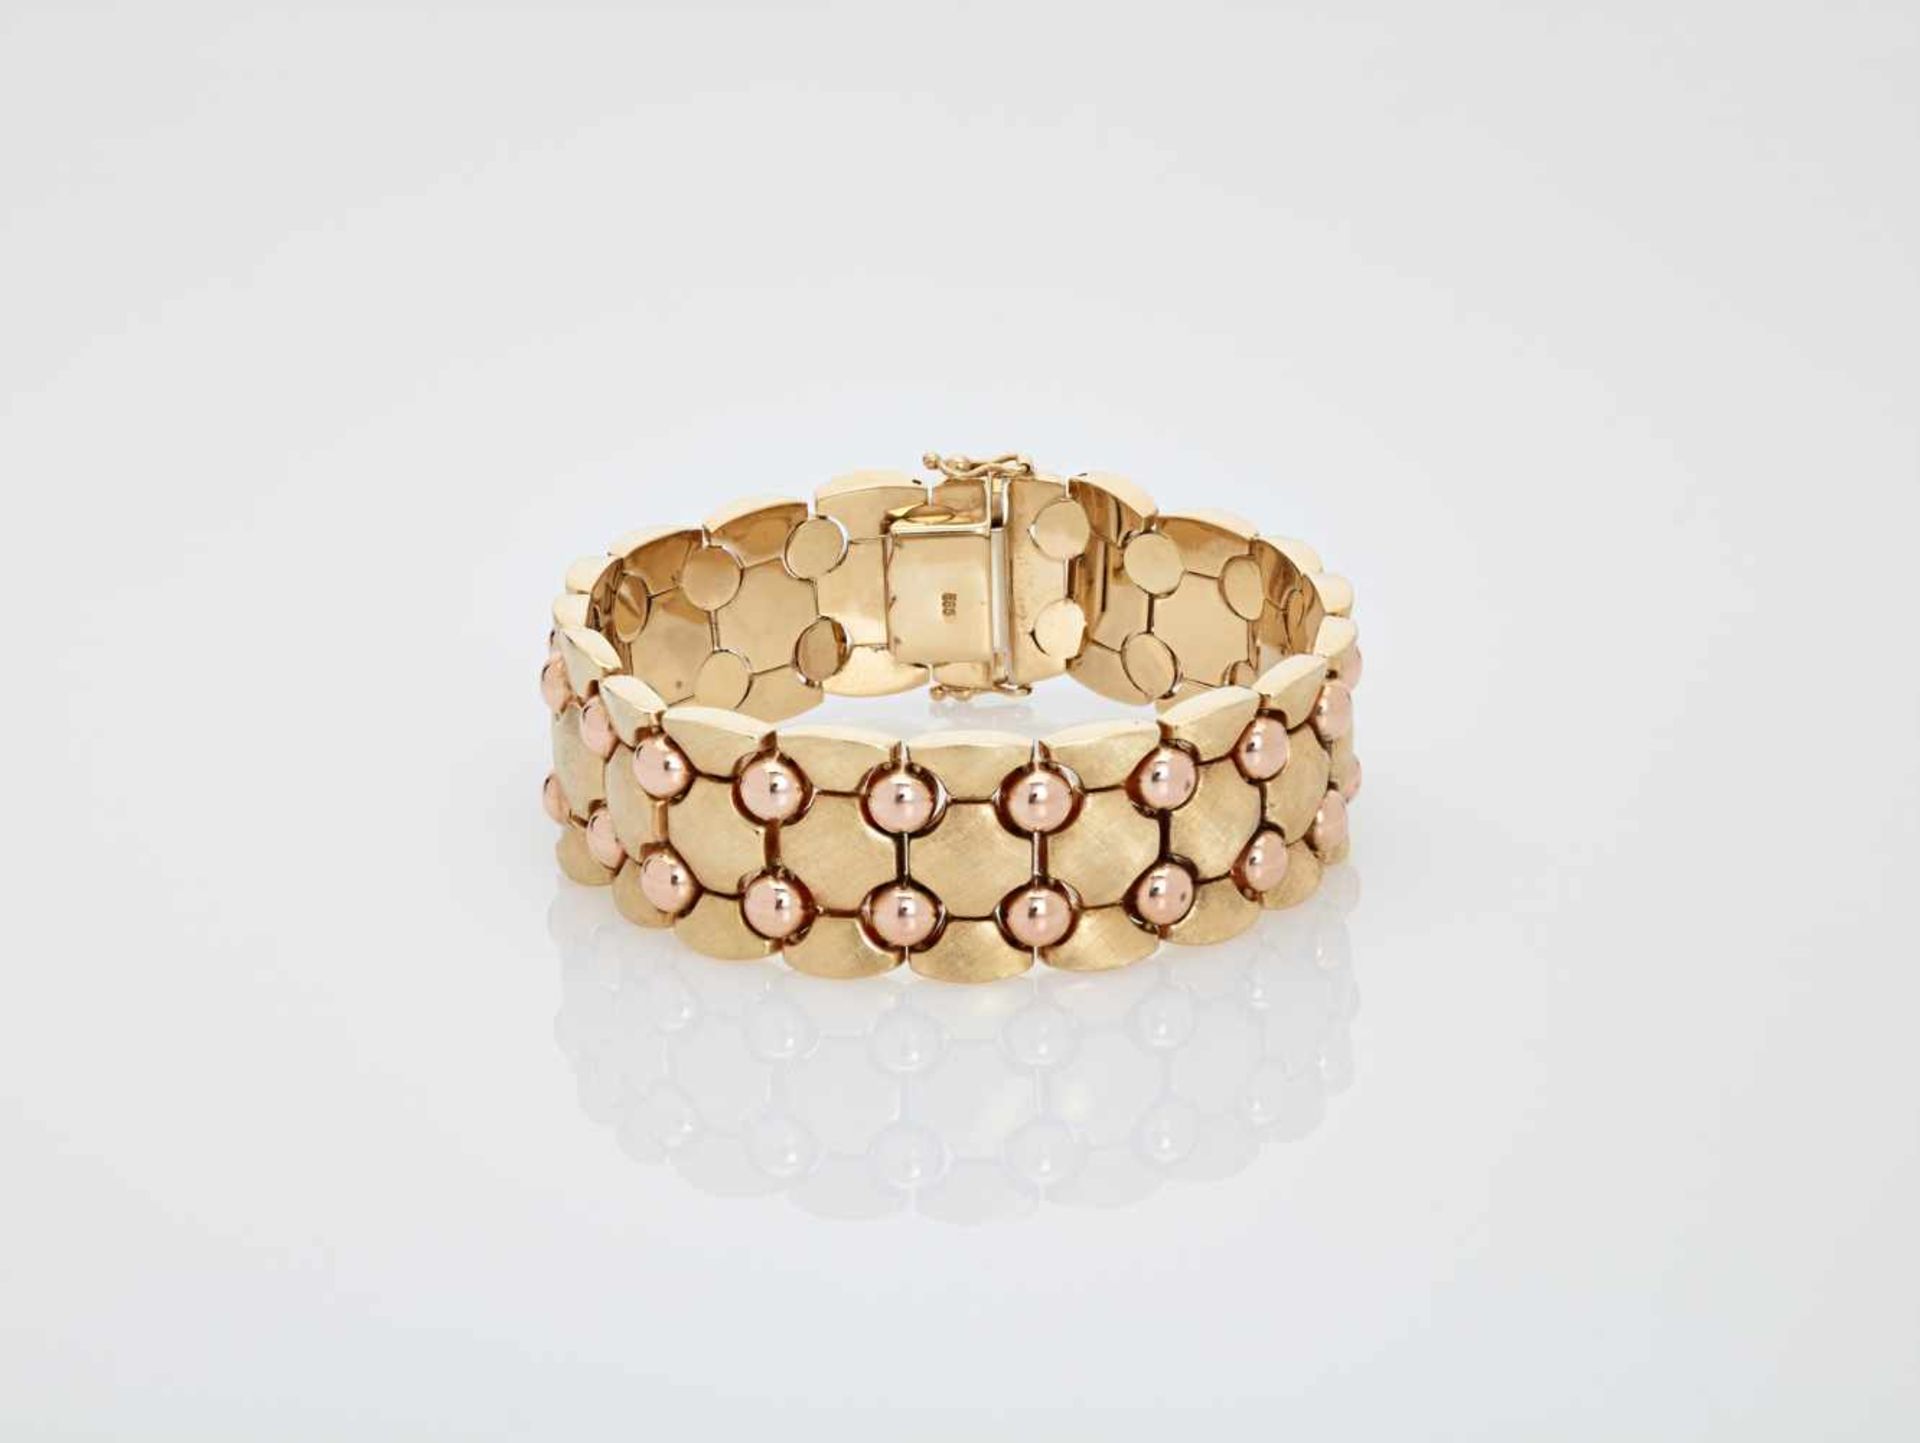 A 1950s YELLOW AND PINK GOLD ‘MOON’ BRACELETItalyafter 1950, stamped hallmark ‘585’Safety lock